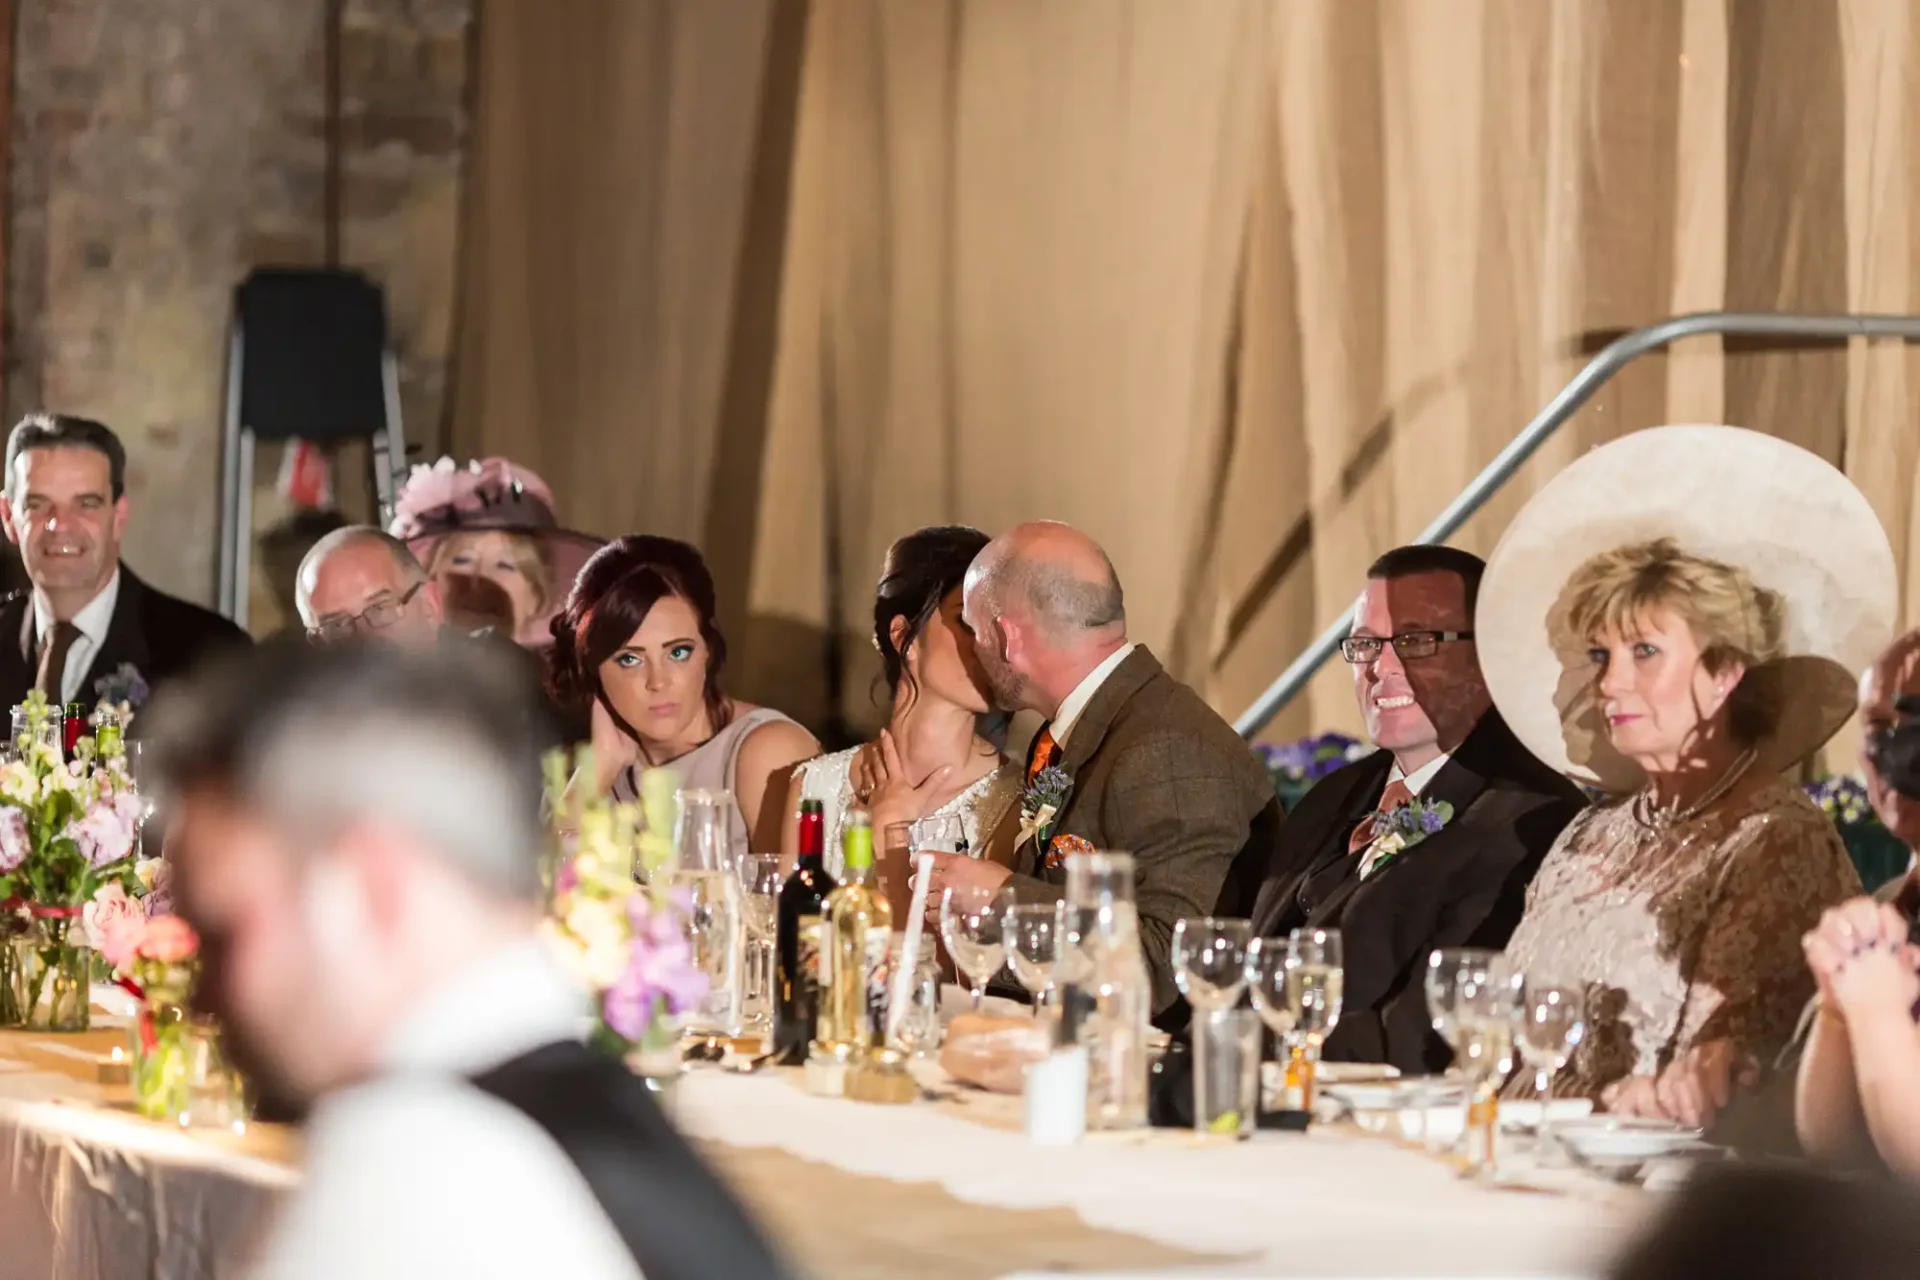 A couple kissing at a wedding reception table surrounded by guests, with floral centerpieces and candles, in a warmly lit venue.